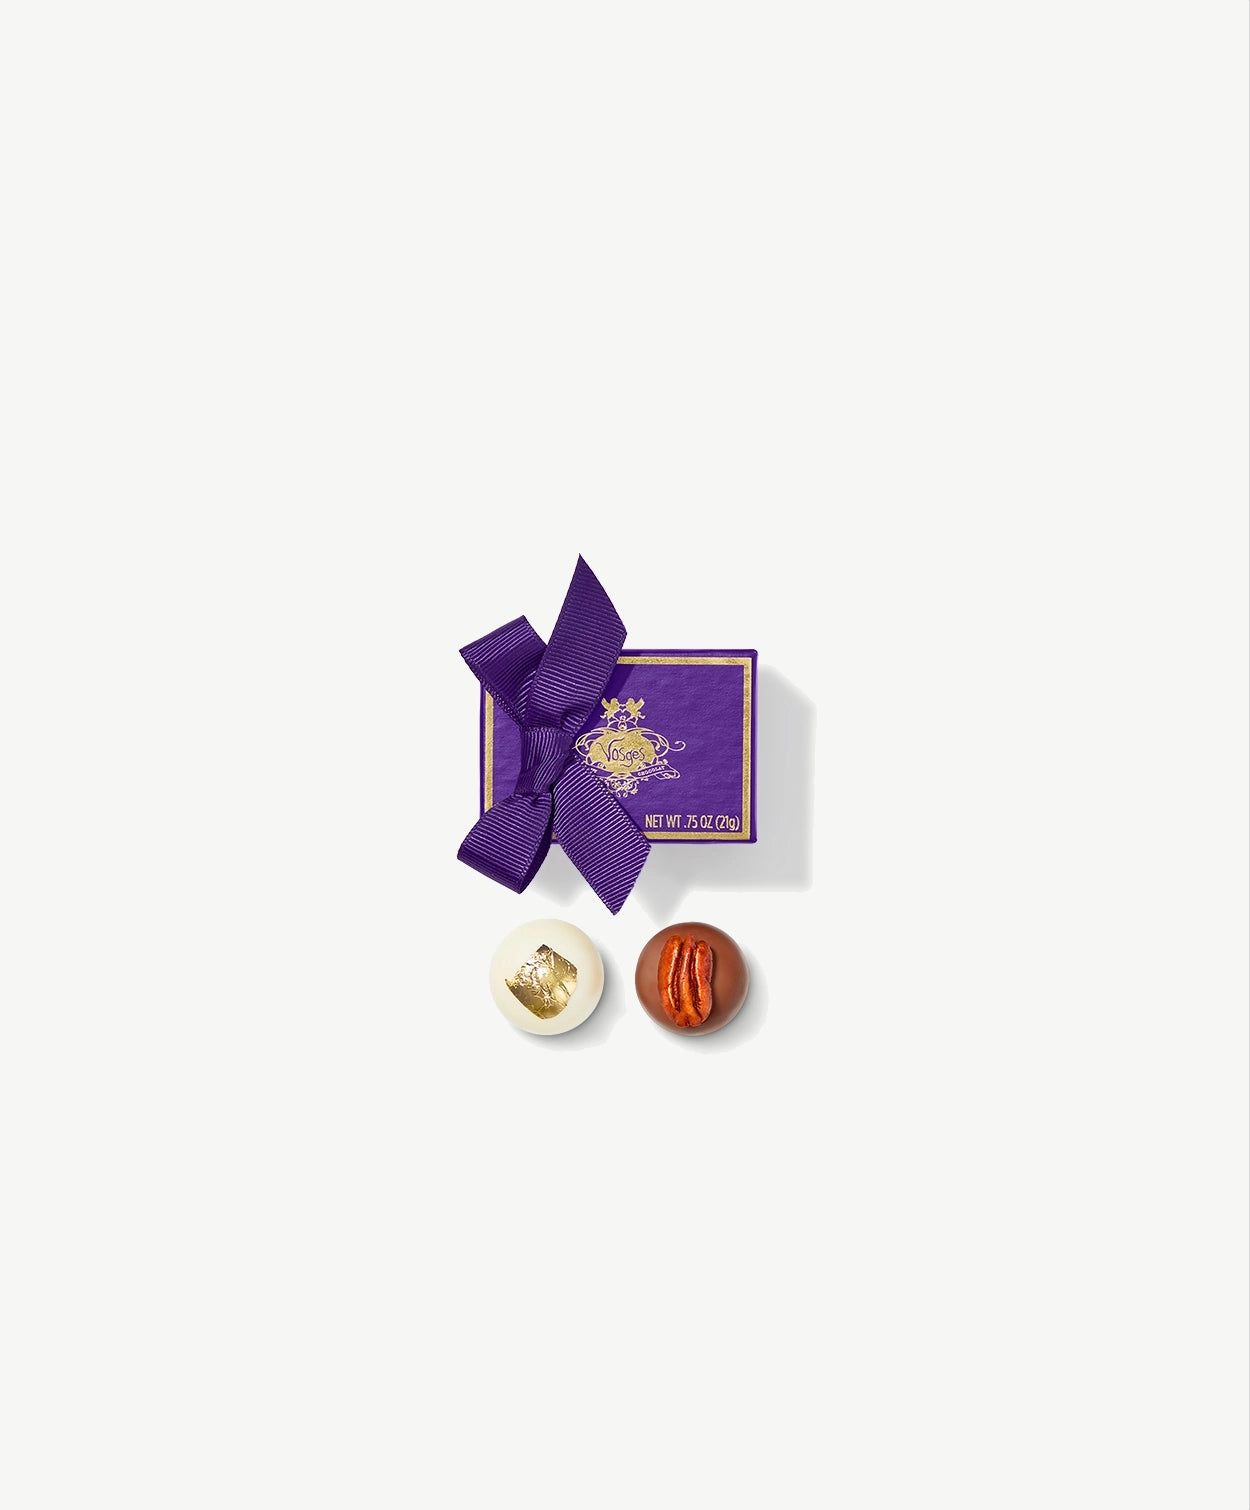 A Vosges Ambrosia truffle and Wink of the Rabbit truffle adorned in gold leaf and a mexican pecan sit side by side in-front a small purple candy box tied with a purple ribbon bow on a grey background.